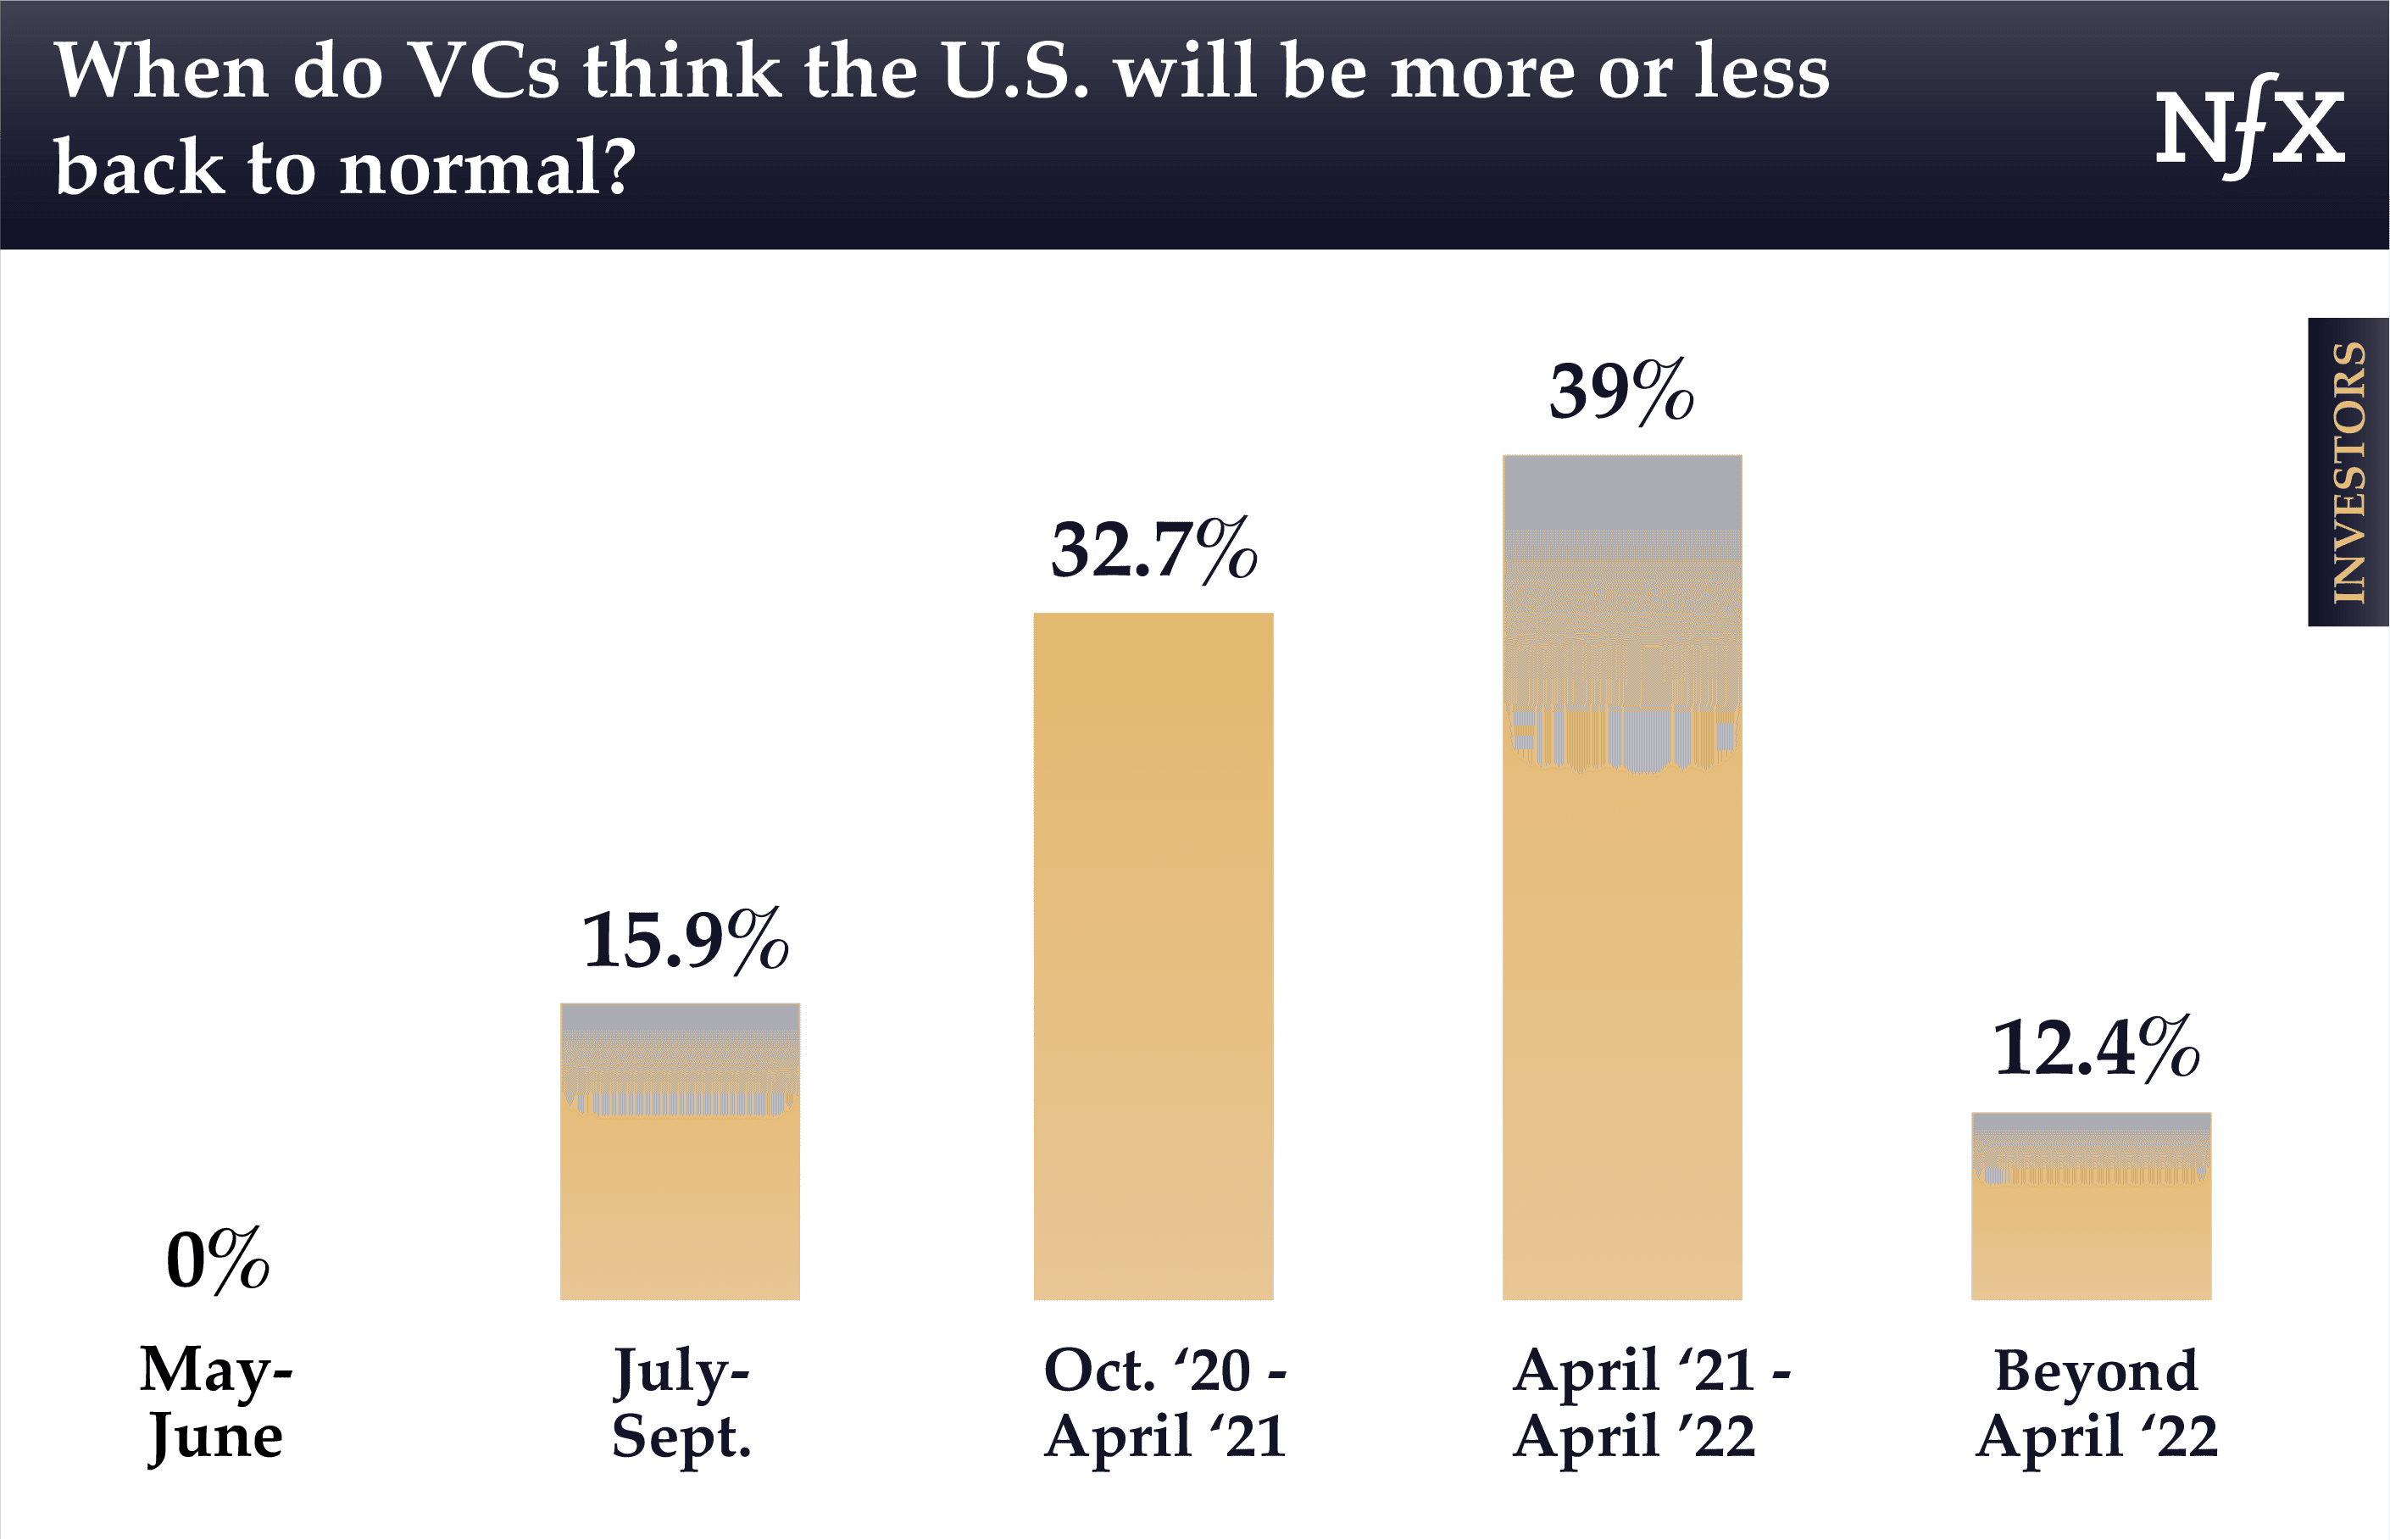 When do VCs think the US will be back to normal?